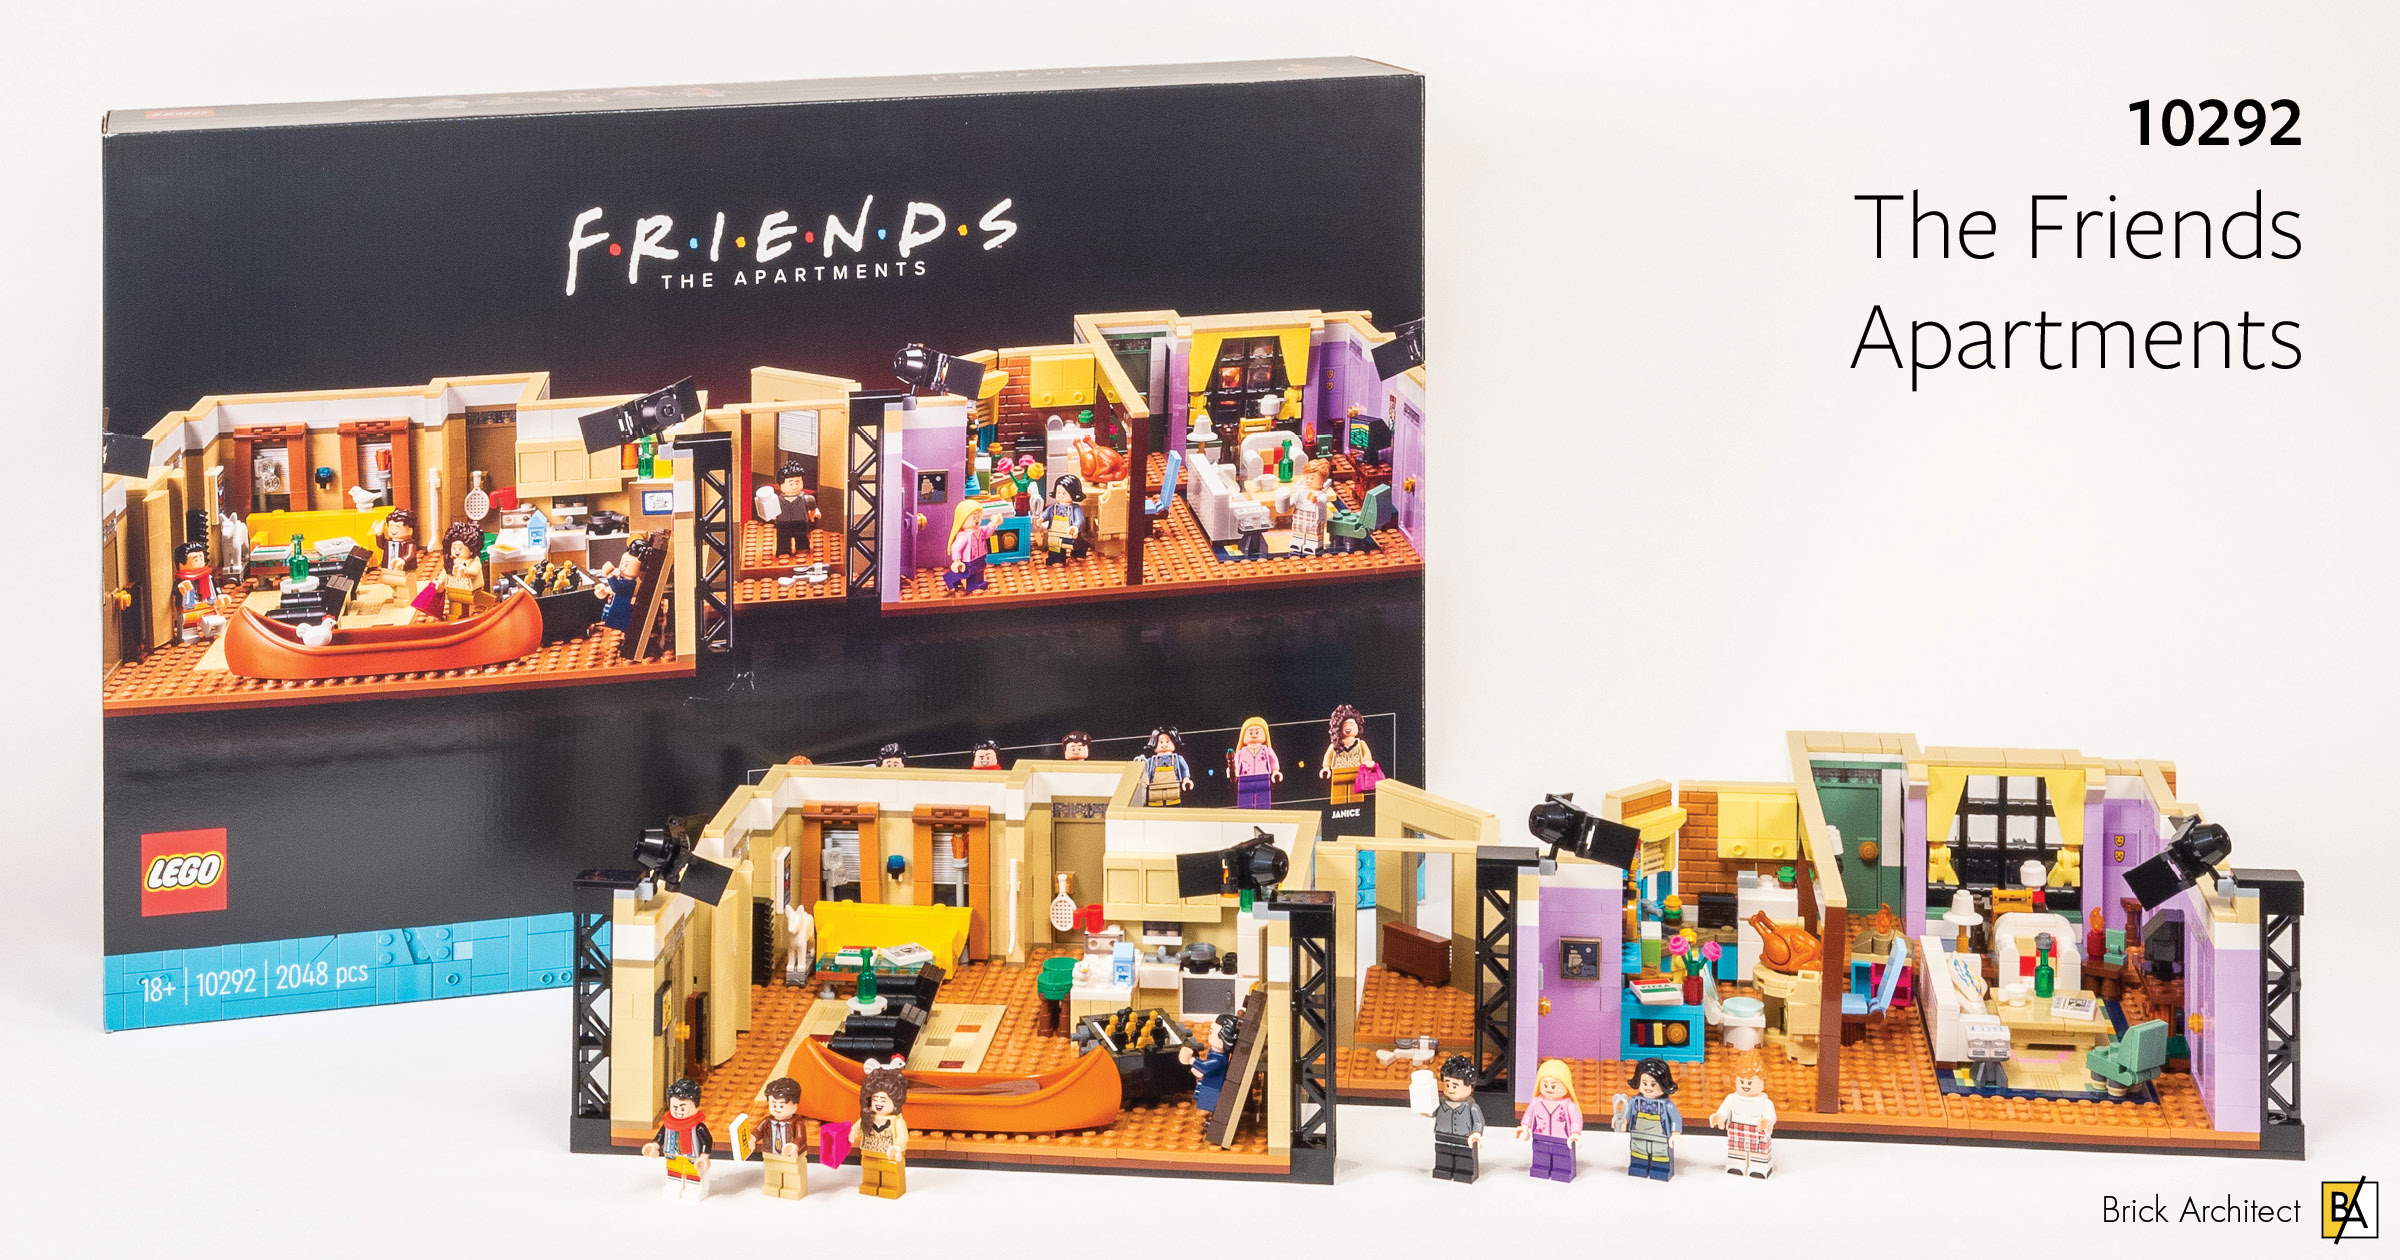 Official reveal of LEGO 10292 F.R.I.E.N.D.S Apartments - Jay's Brick Blog